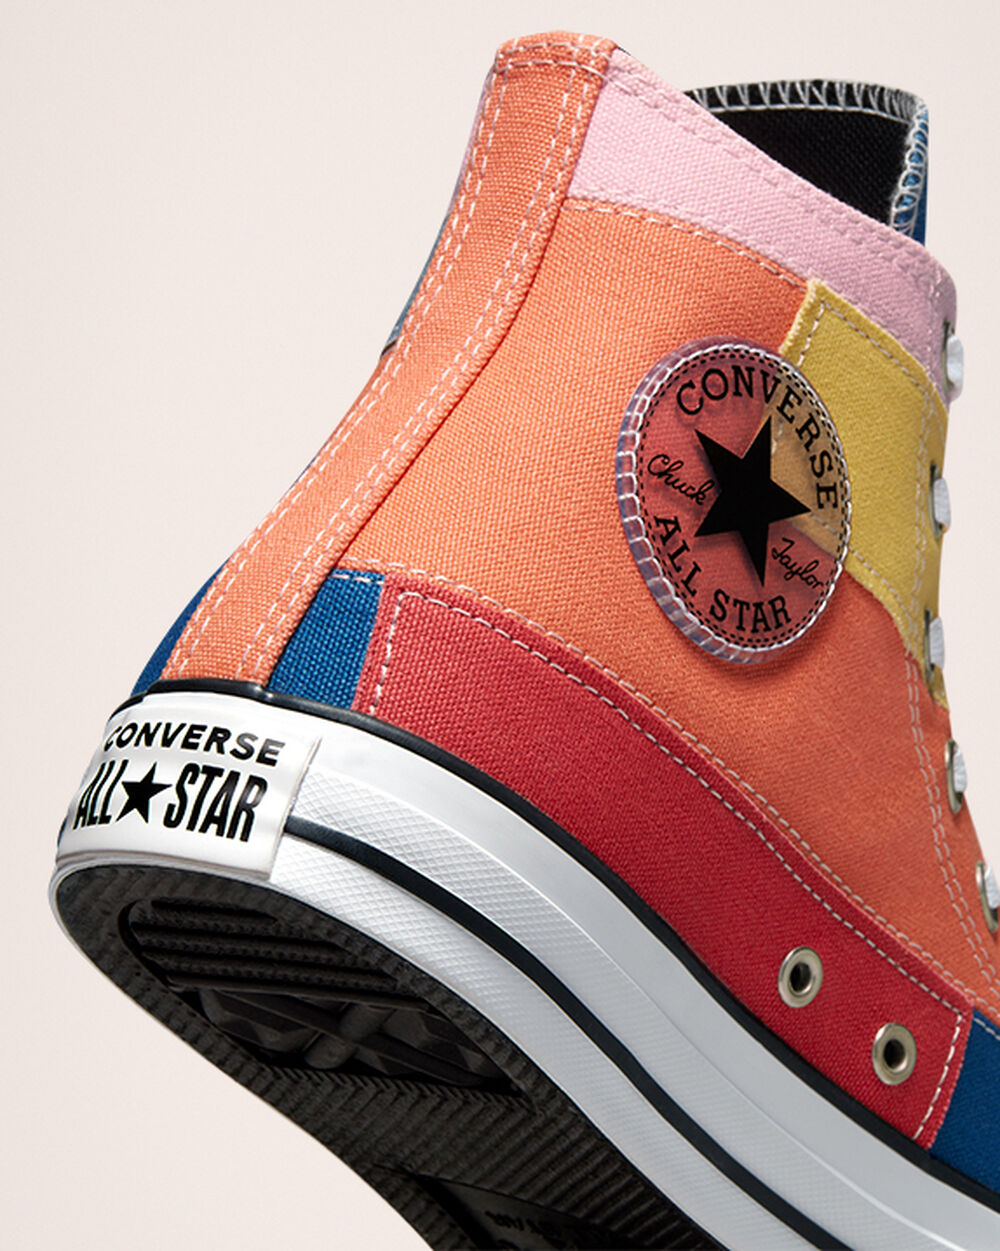 Tenis Converse Chuck Taylor All Star Mujer Azules Rosas | Mexico-715806